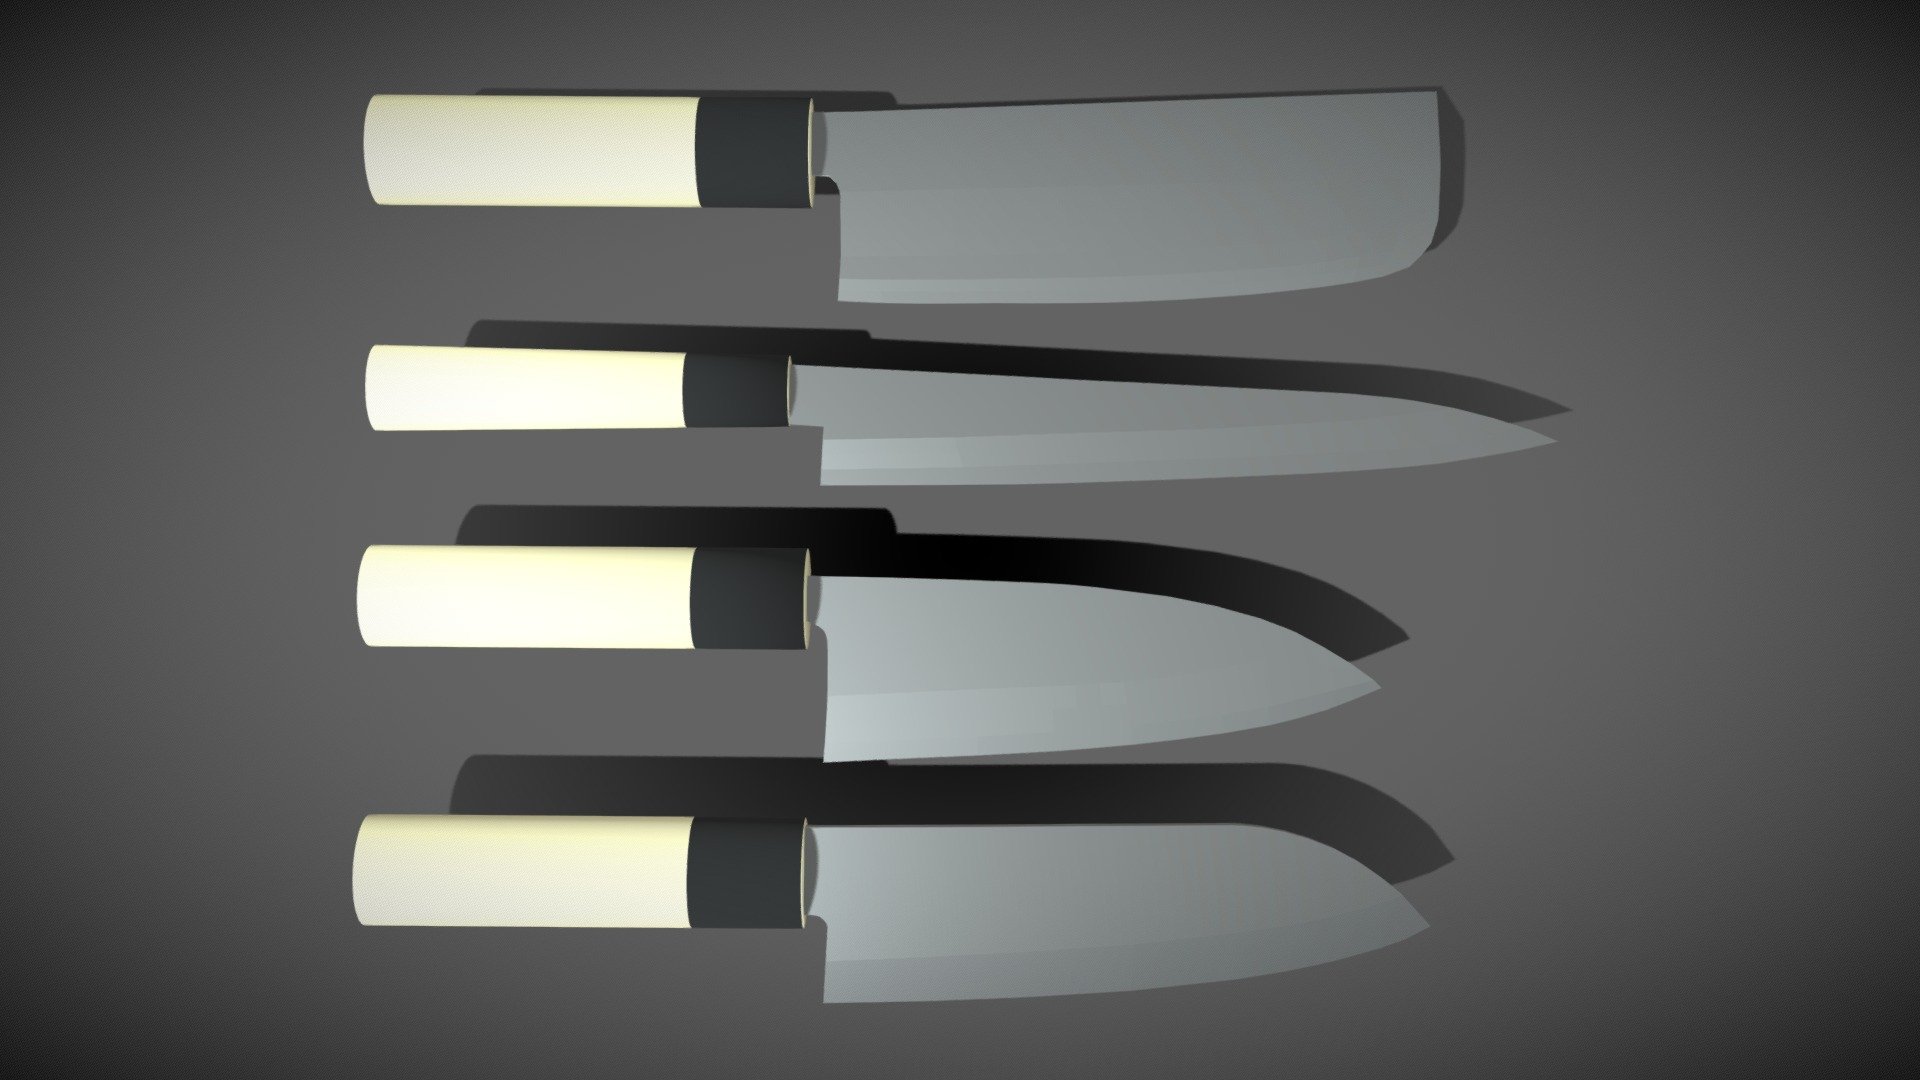 A set of exelent japanese knifes. Thes 4 knifes are the base of every japanese kitchen. 
Kodeba: is a typical meet knife to cut normal steaks or other parts of meet
Nakiri: it is used to cut vegetables
Santoku: it is used for all kinds of cutting
Sashimi: it is used for filleting Fisch

All knifes are Lowpoly Meshs and can be used for Games and more 3d model